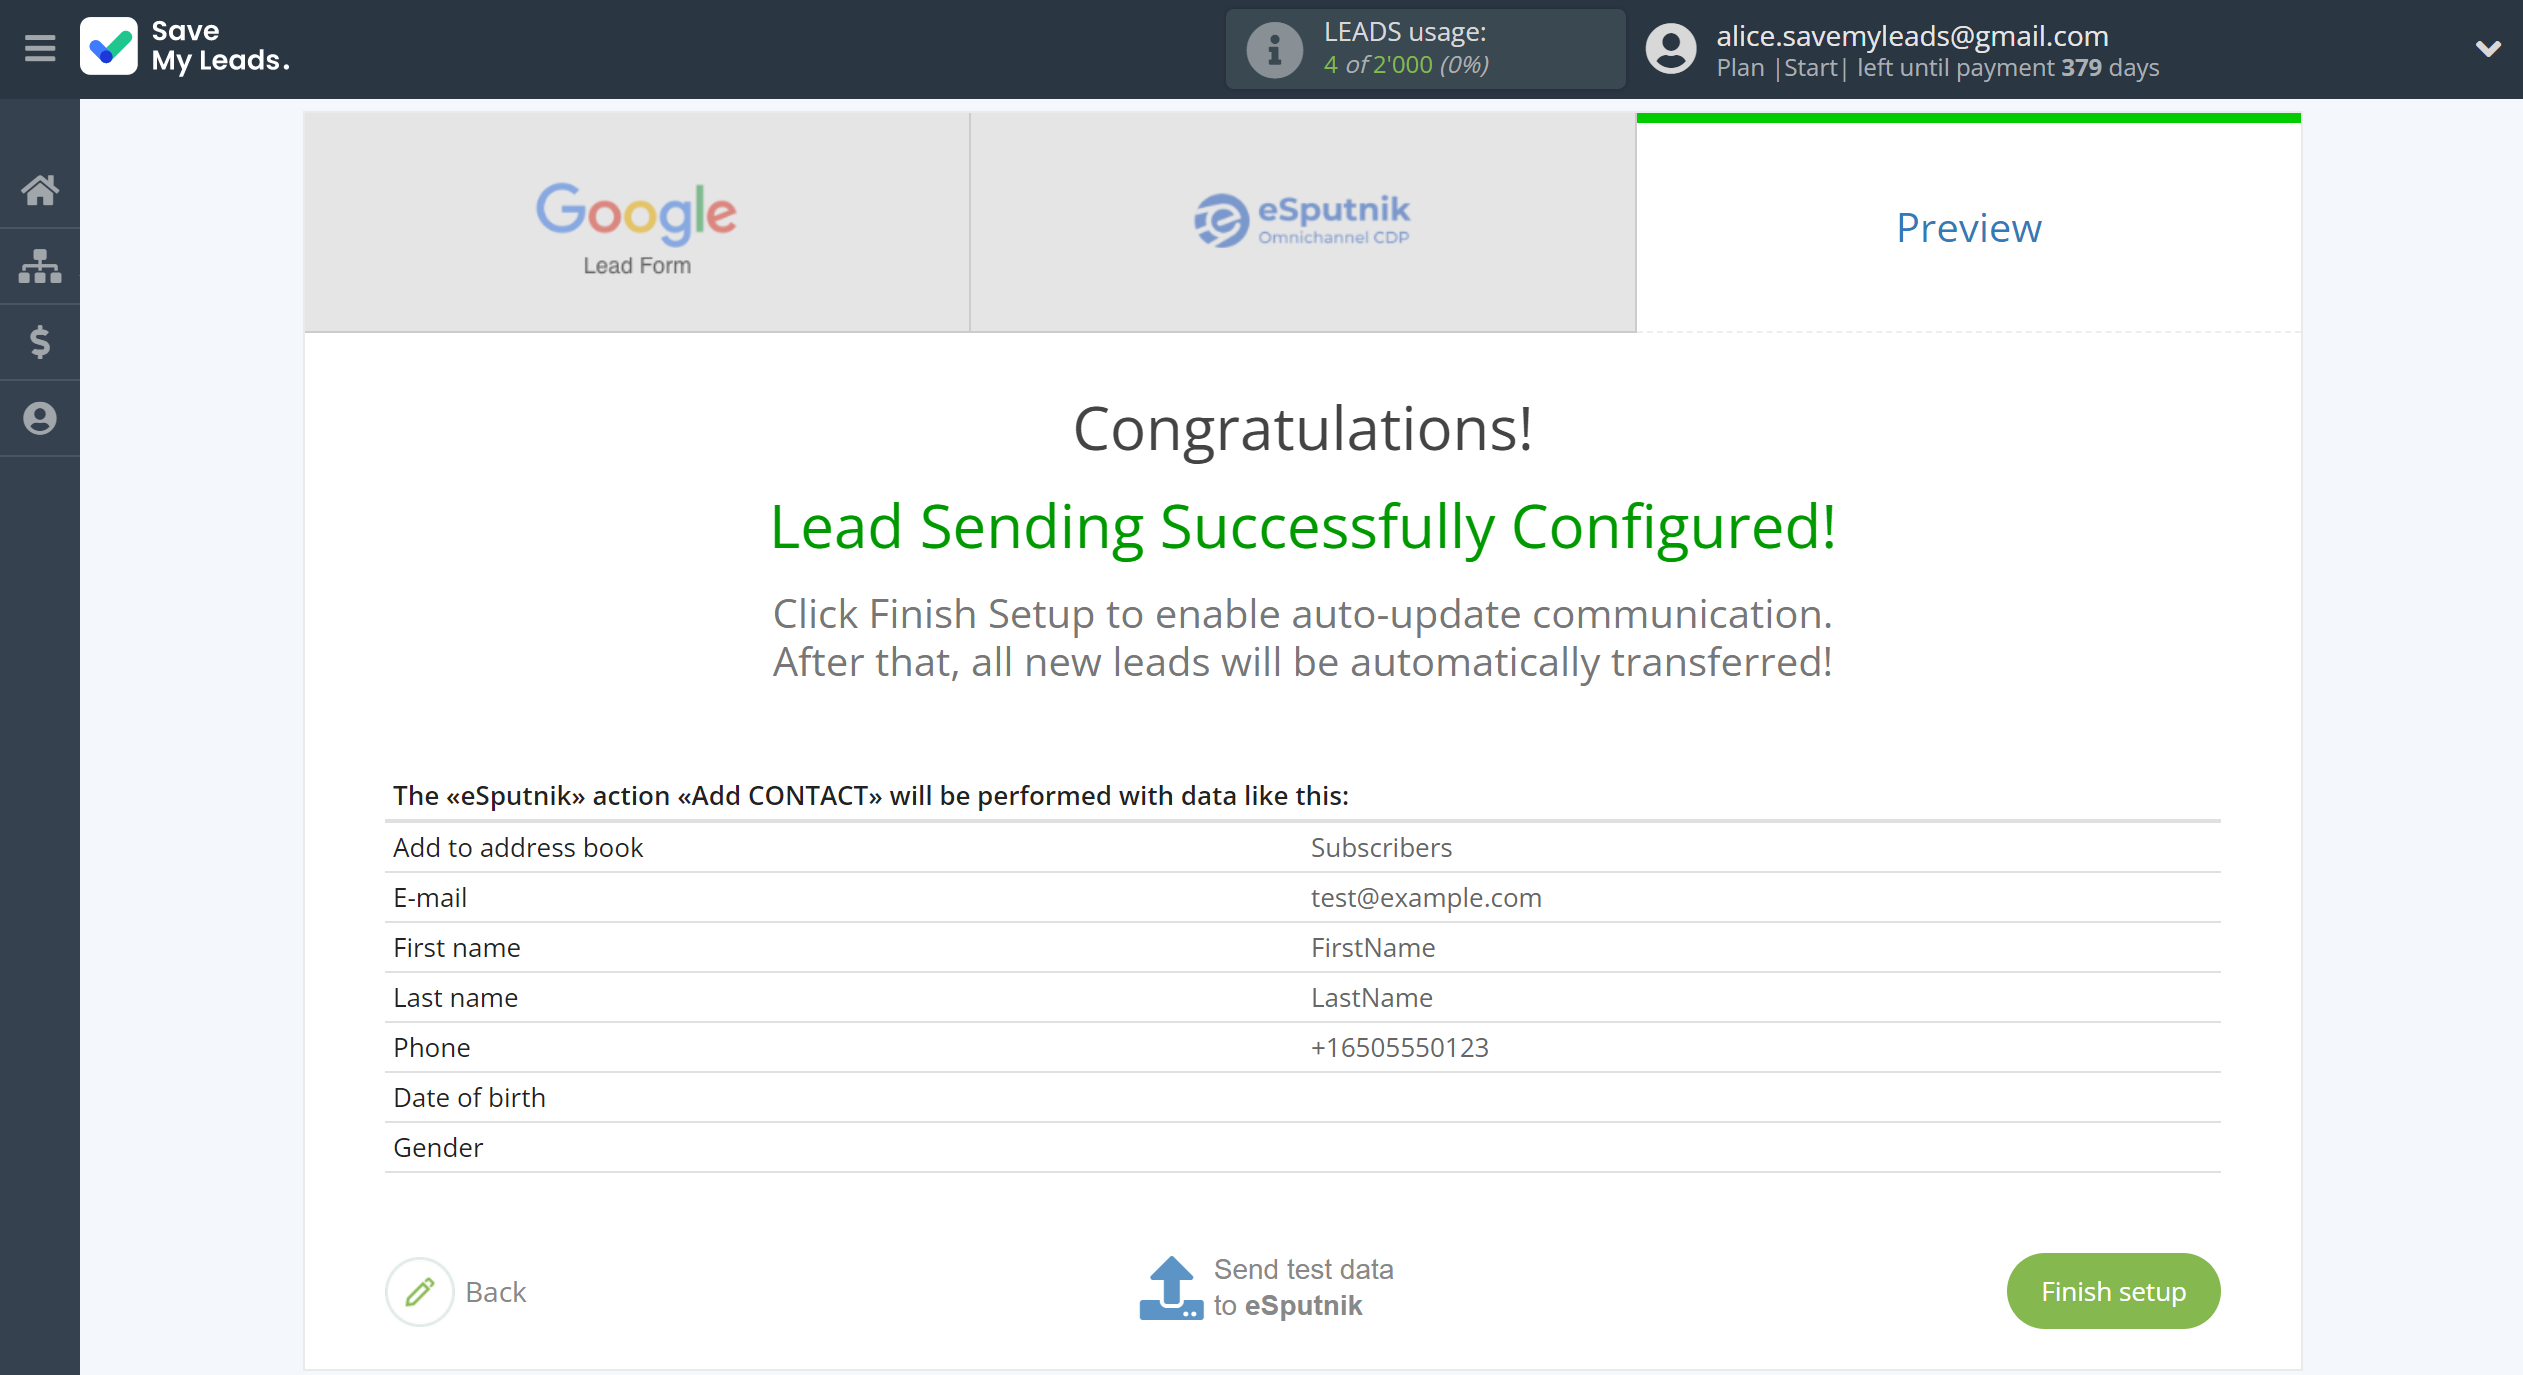 How to Connect Google Lead Form with eSputnik Add Contacts | Test data